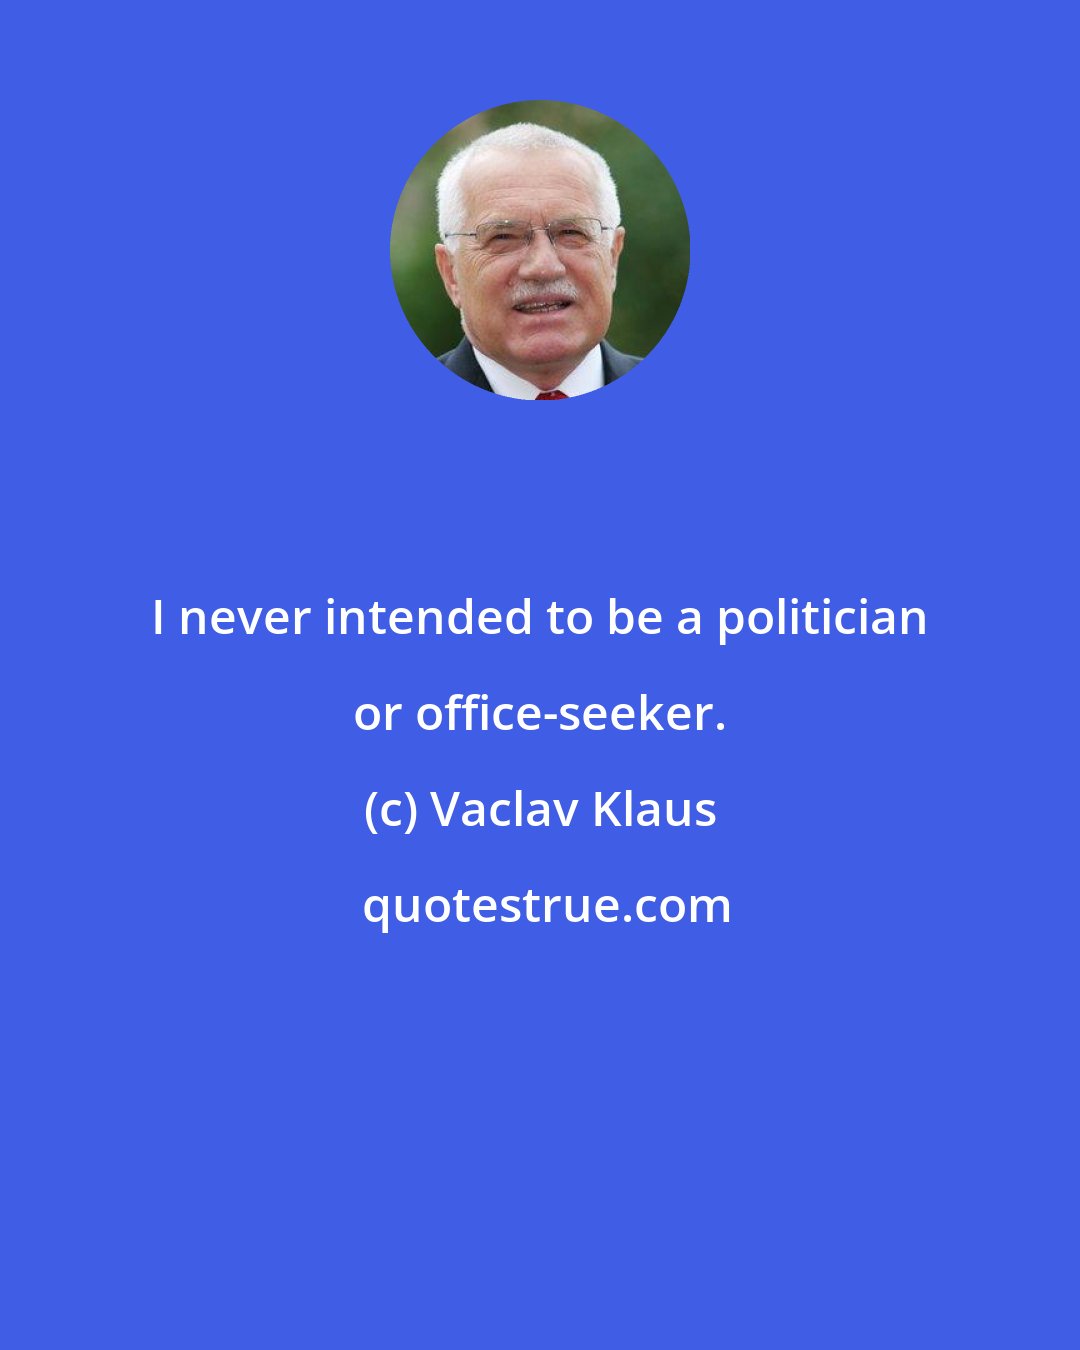 Vaclav Klaus: I never intended to be a politician or office-seeker.